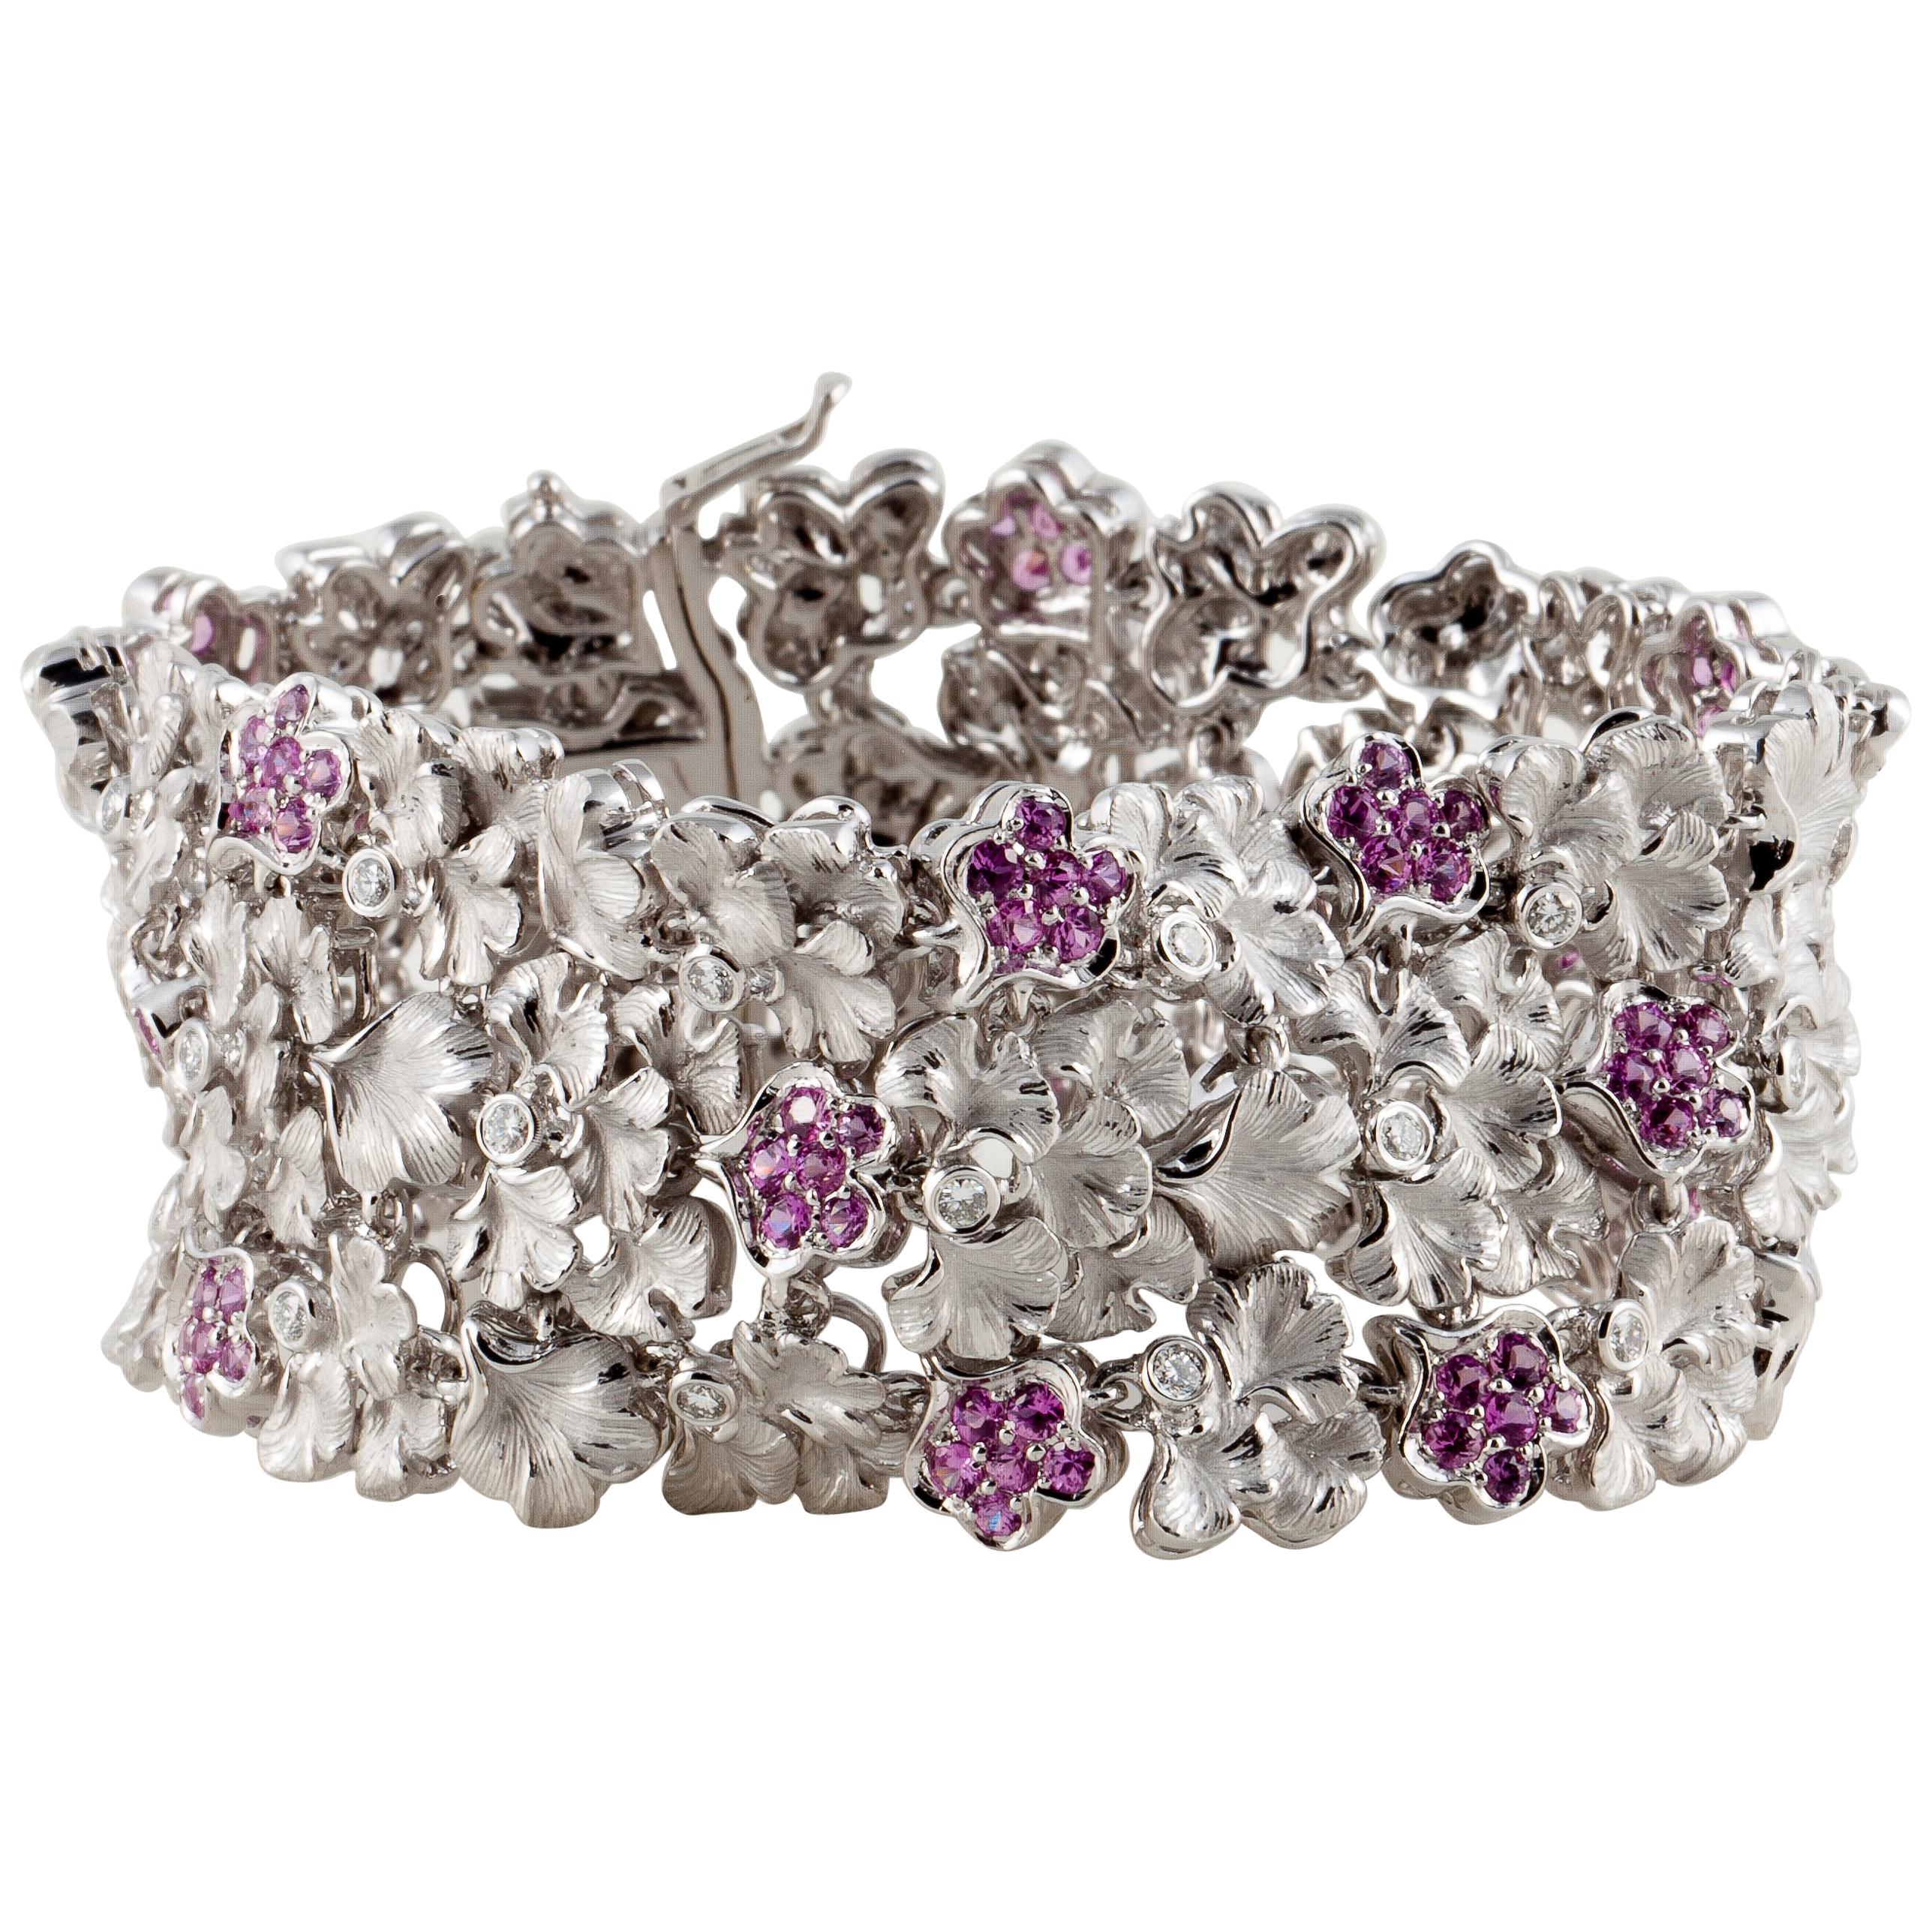 Carrera y Carrera 18K White Gold Pink Sapphire and Diamond Floral Bracelet